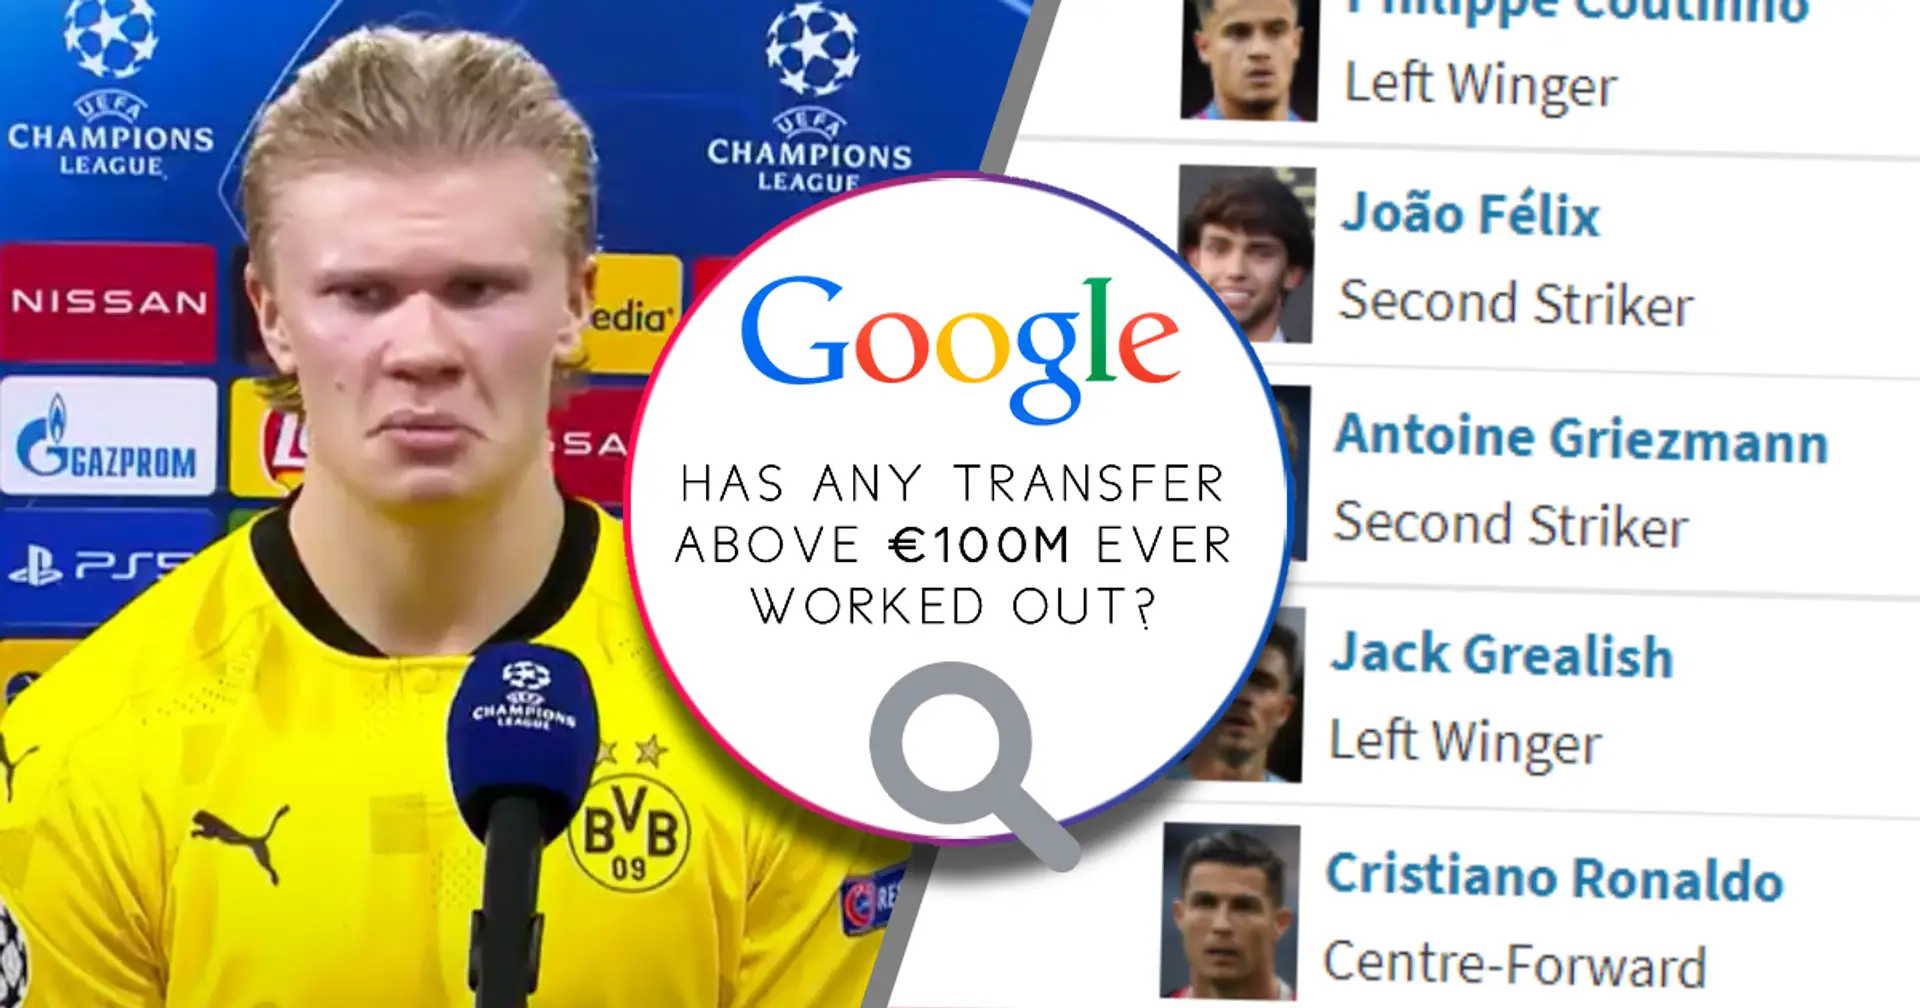 Has any transfer above €100 million ever worked out? Answered